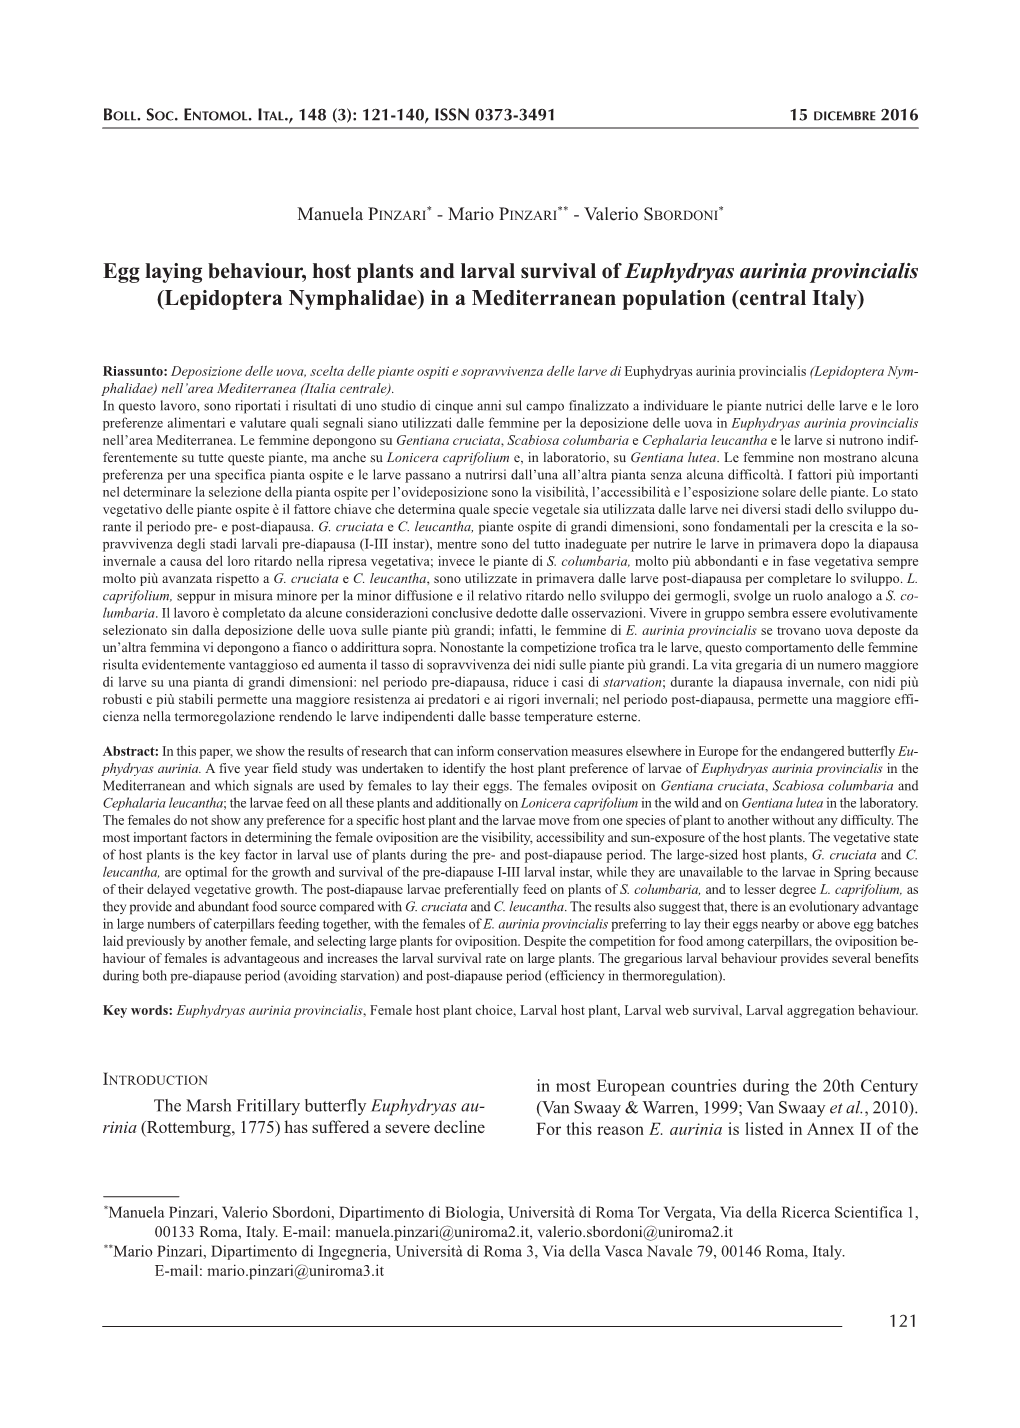 Egg Laying Behaviour, Host Plants and Larval Survival of Euphydryas Aurinia Provincialis (Lepidoptera Nymphalidae) in a Mediterranean Population (Central Italy)